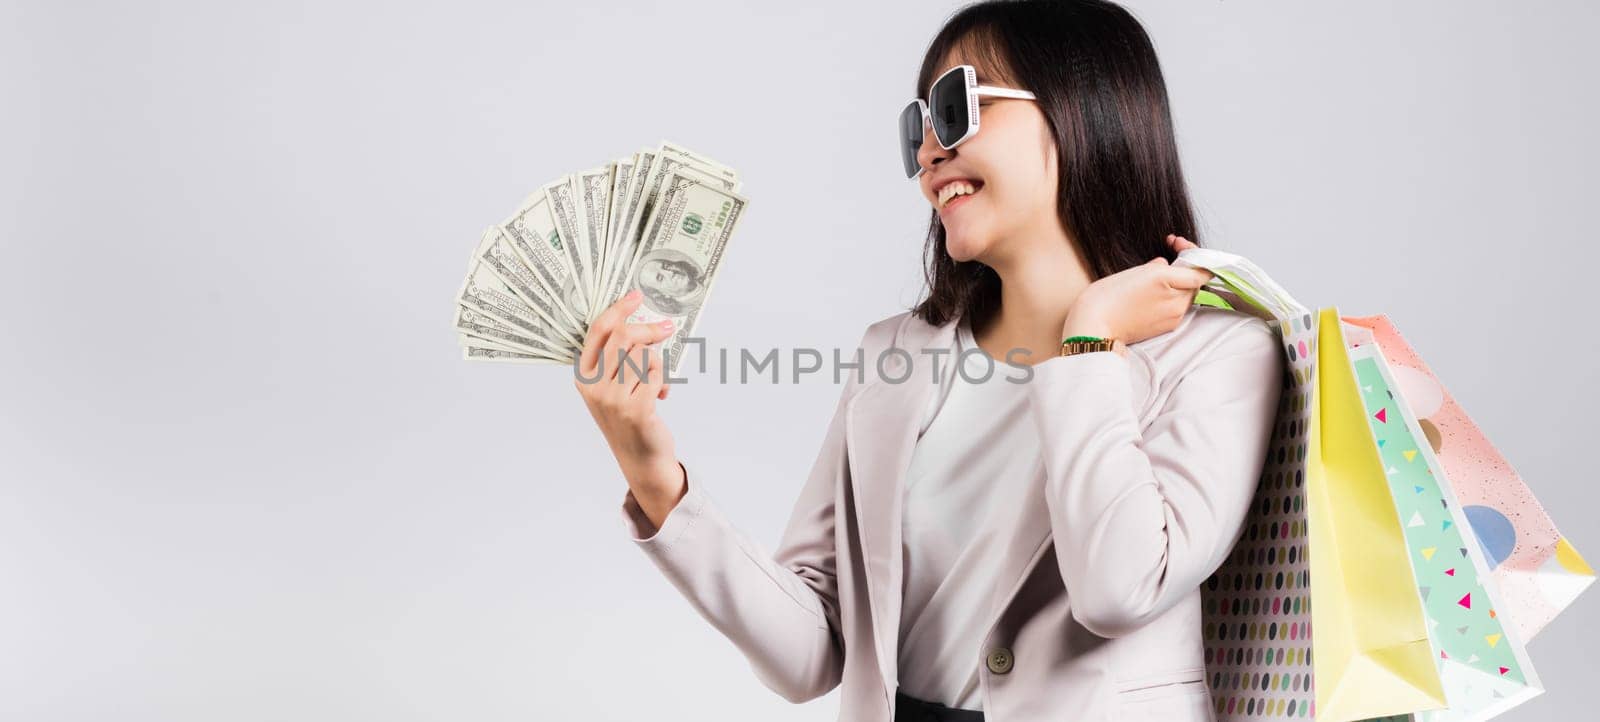 Woman with glasses confident shopper smile holding online shopping bags multicolor and dollar money banknotes on hand by Sorapop